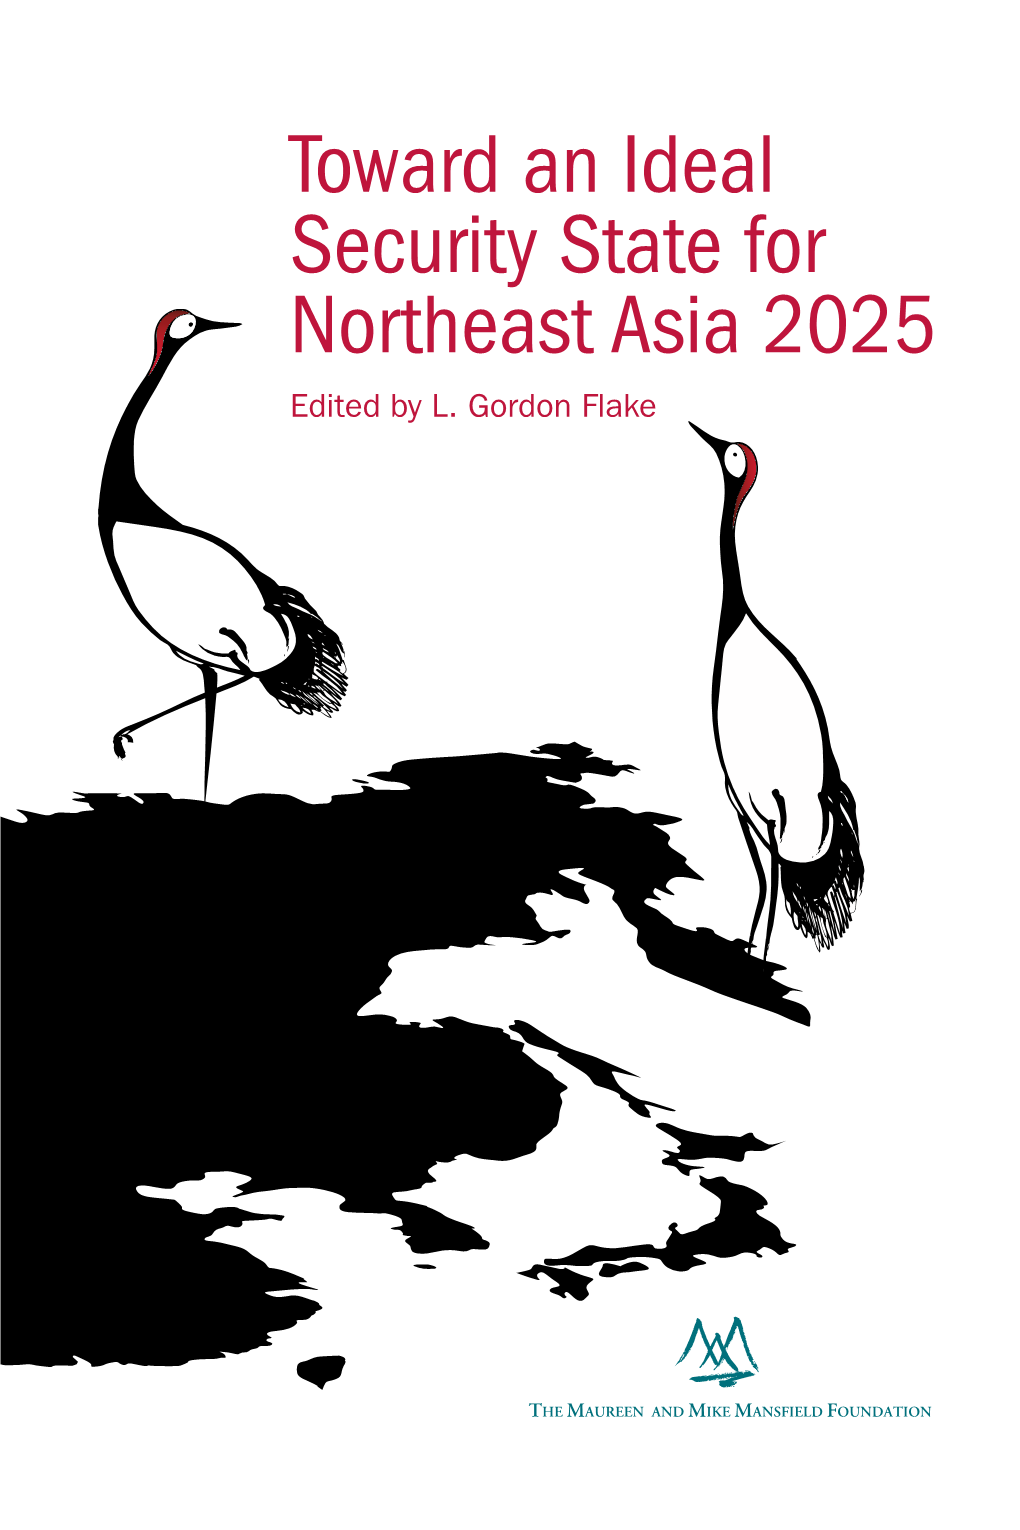 Towards an Ideal Security State for Northeast Asia 2025